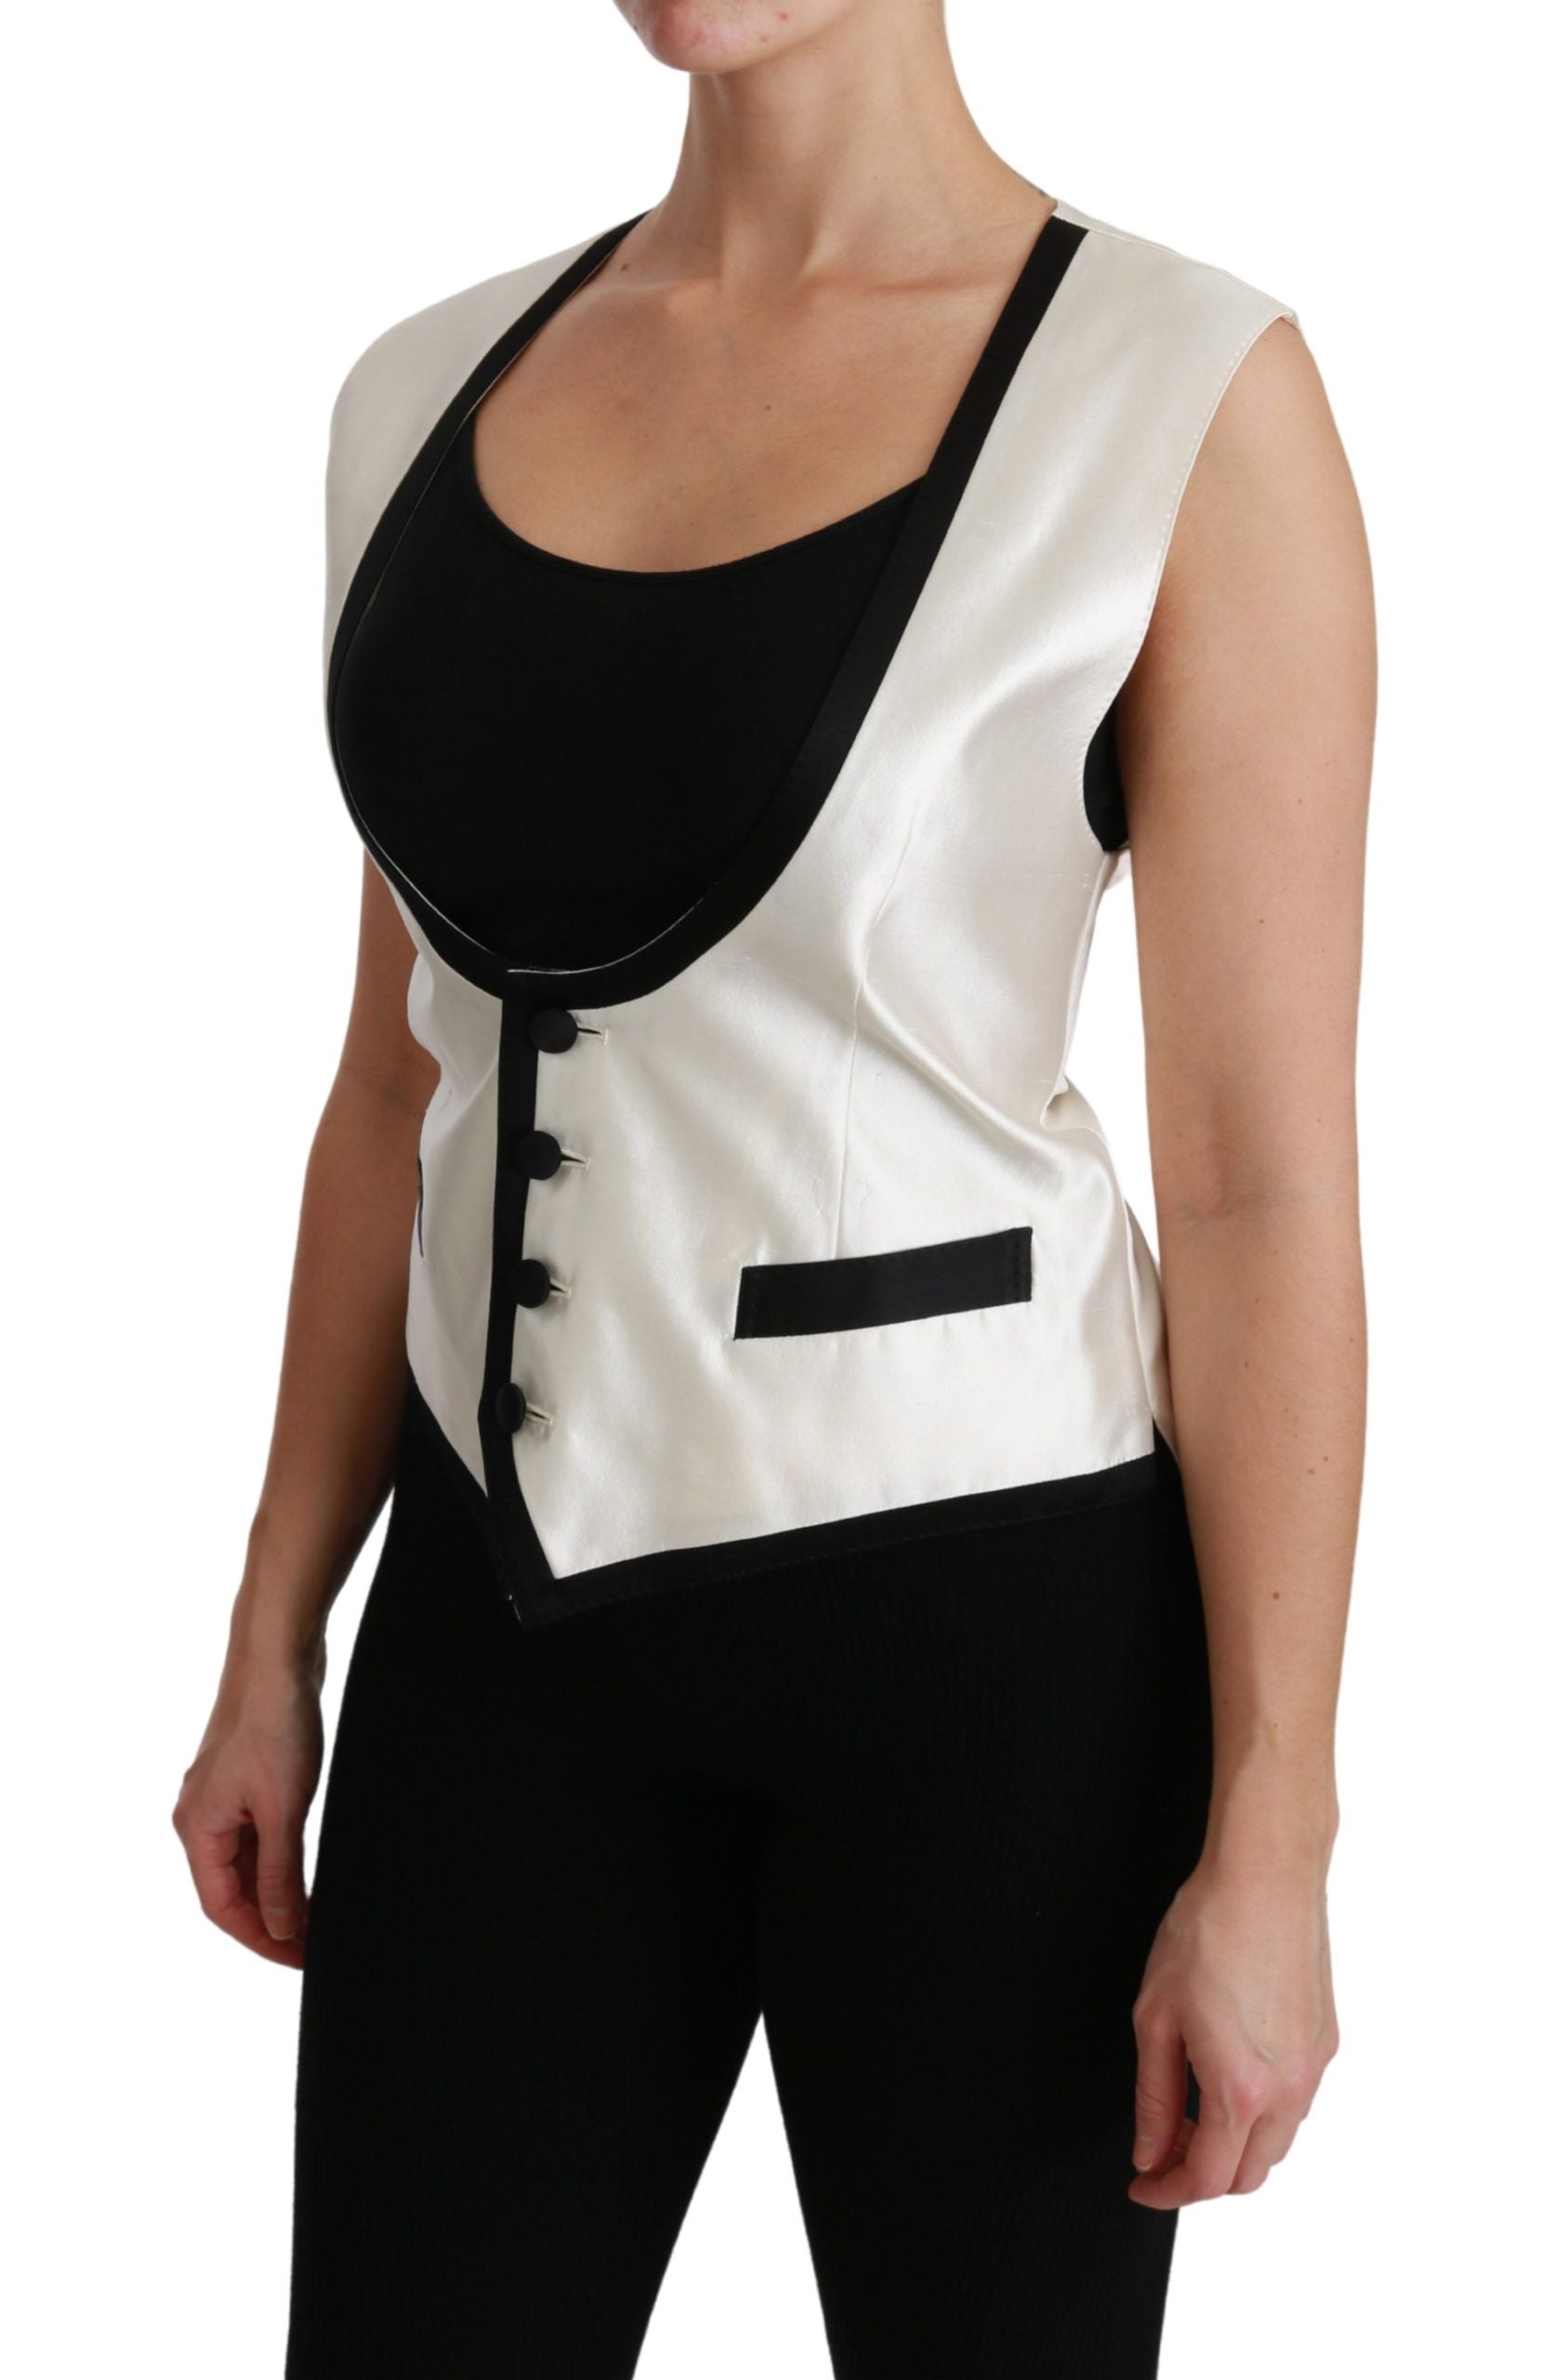 Dolce & Gabbana Ladies' White Waistcoat Slim Vest Silk Top - Designed by Dolce & Gabbana Available to Buy at a Discounted Price on Moon Behind The Hill Online Designer Discount Store